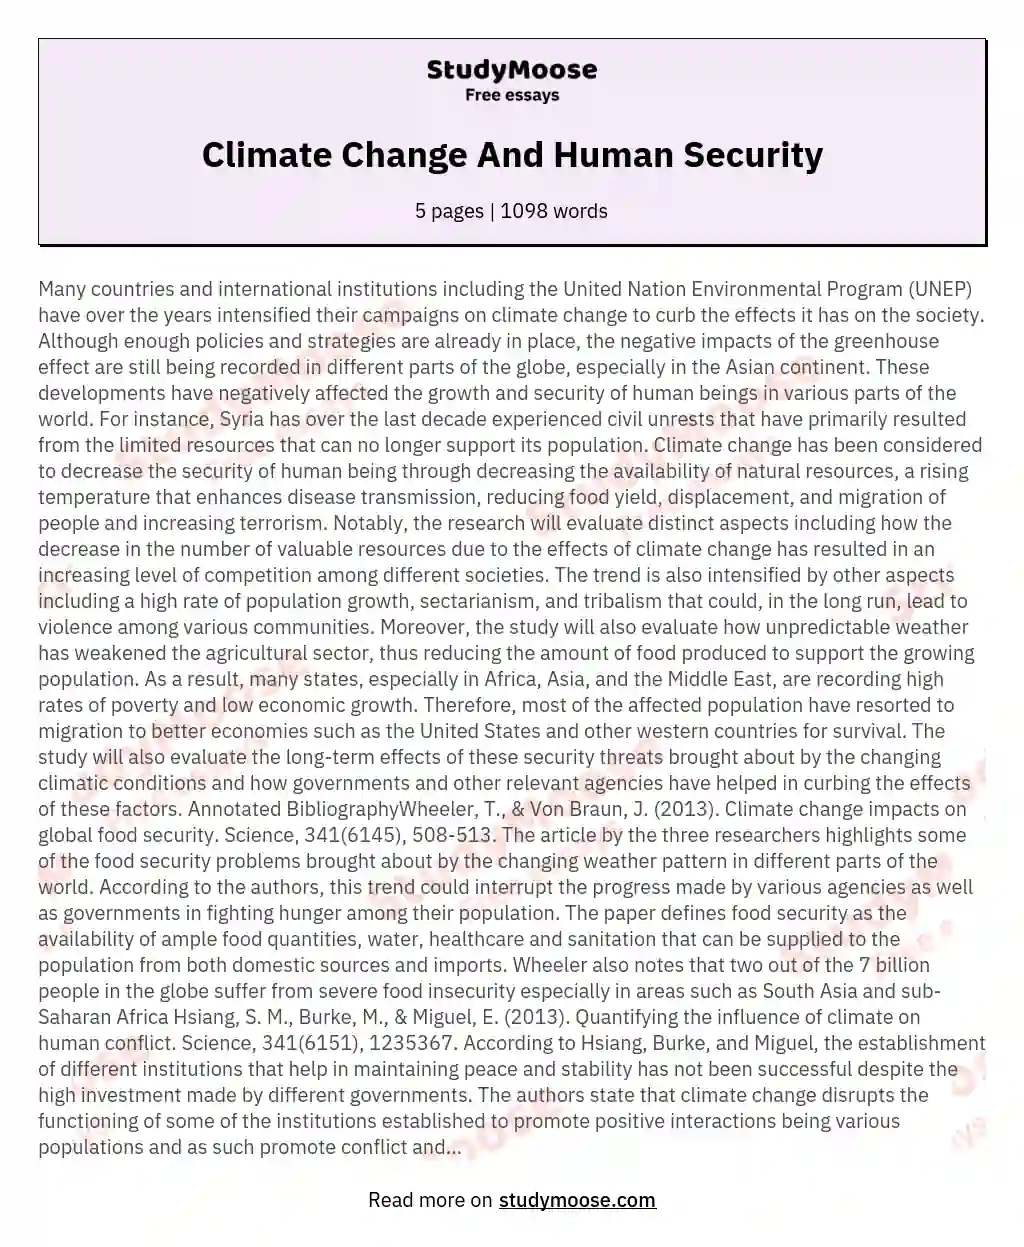 Climate Change And Human Security essay